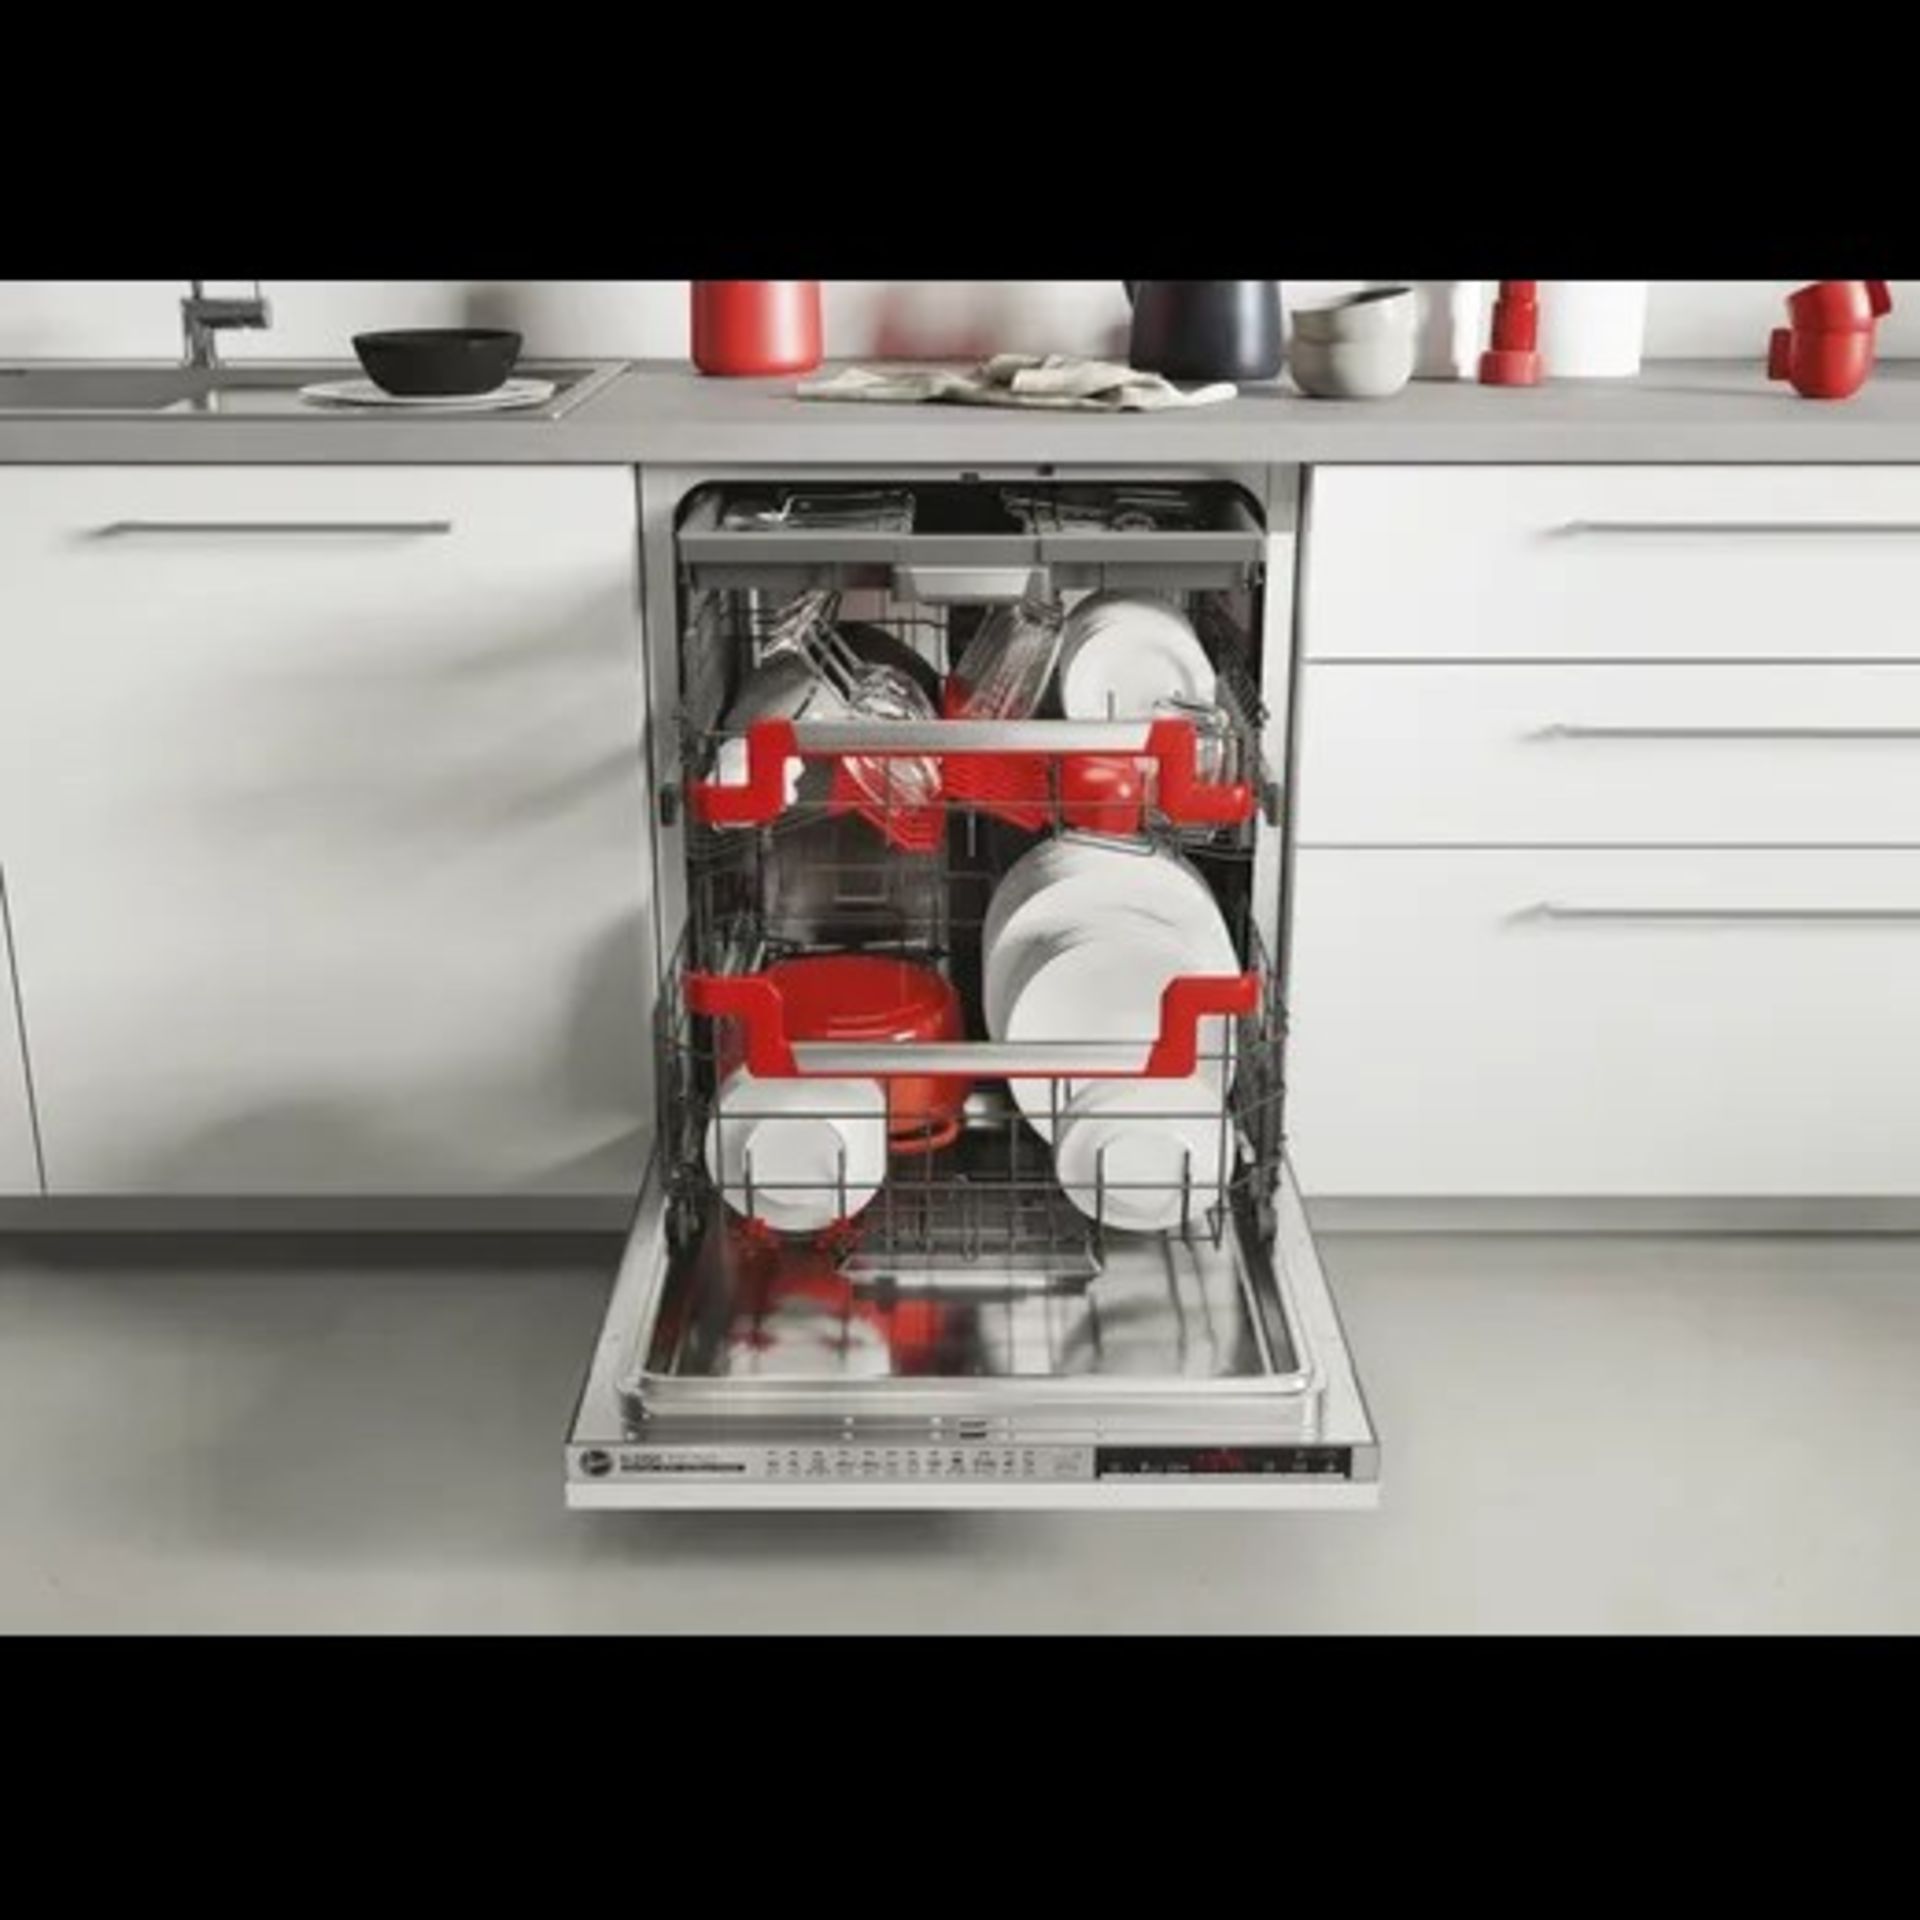 + VAT Grade B ISP £499 - Hoover HIB6B2S3FS Fully Intergrated Dishwasher - 16 Place Settings - 12 - Image 2 of 2